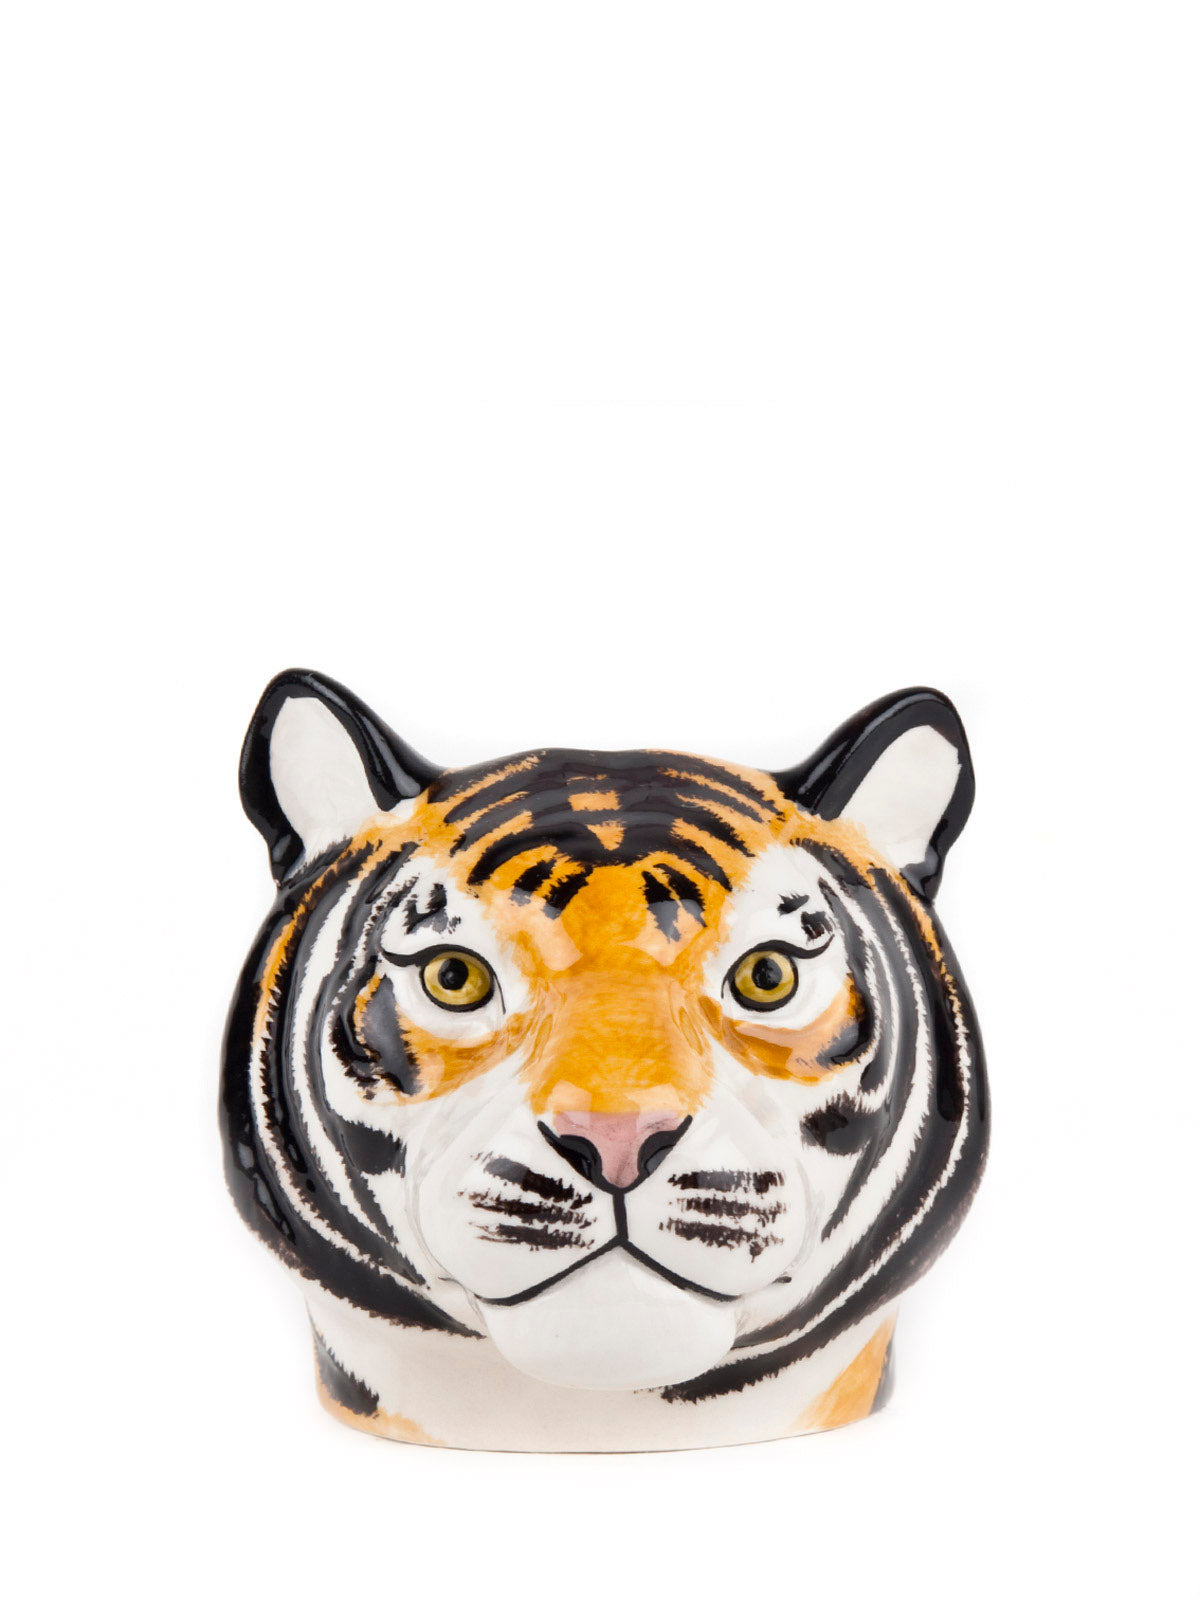 Tiger egg cup